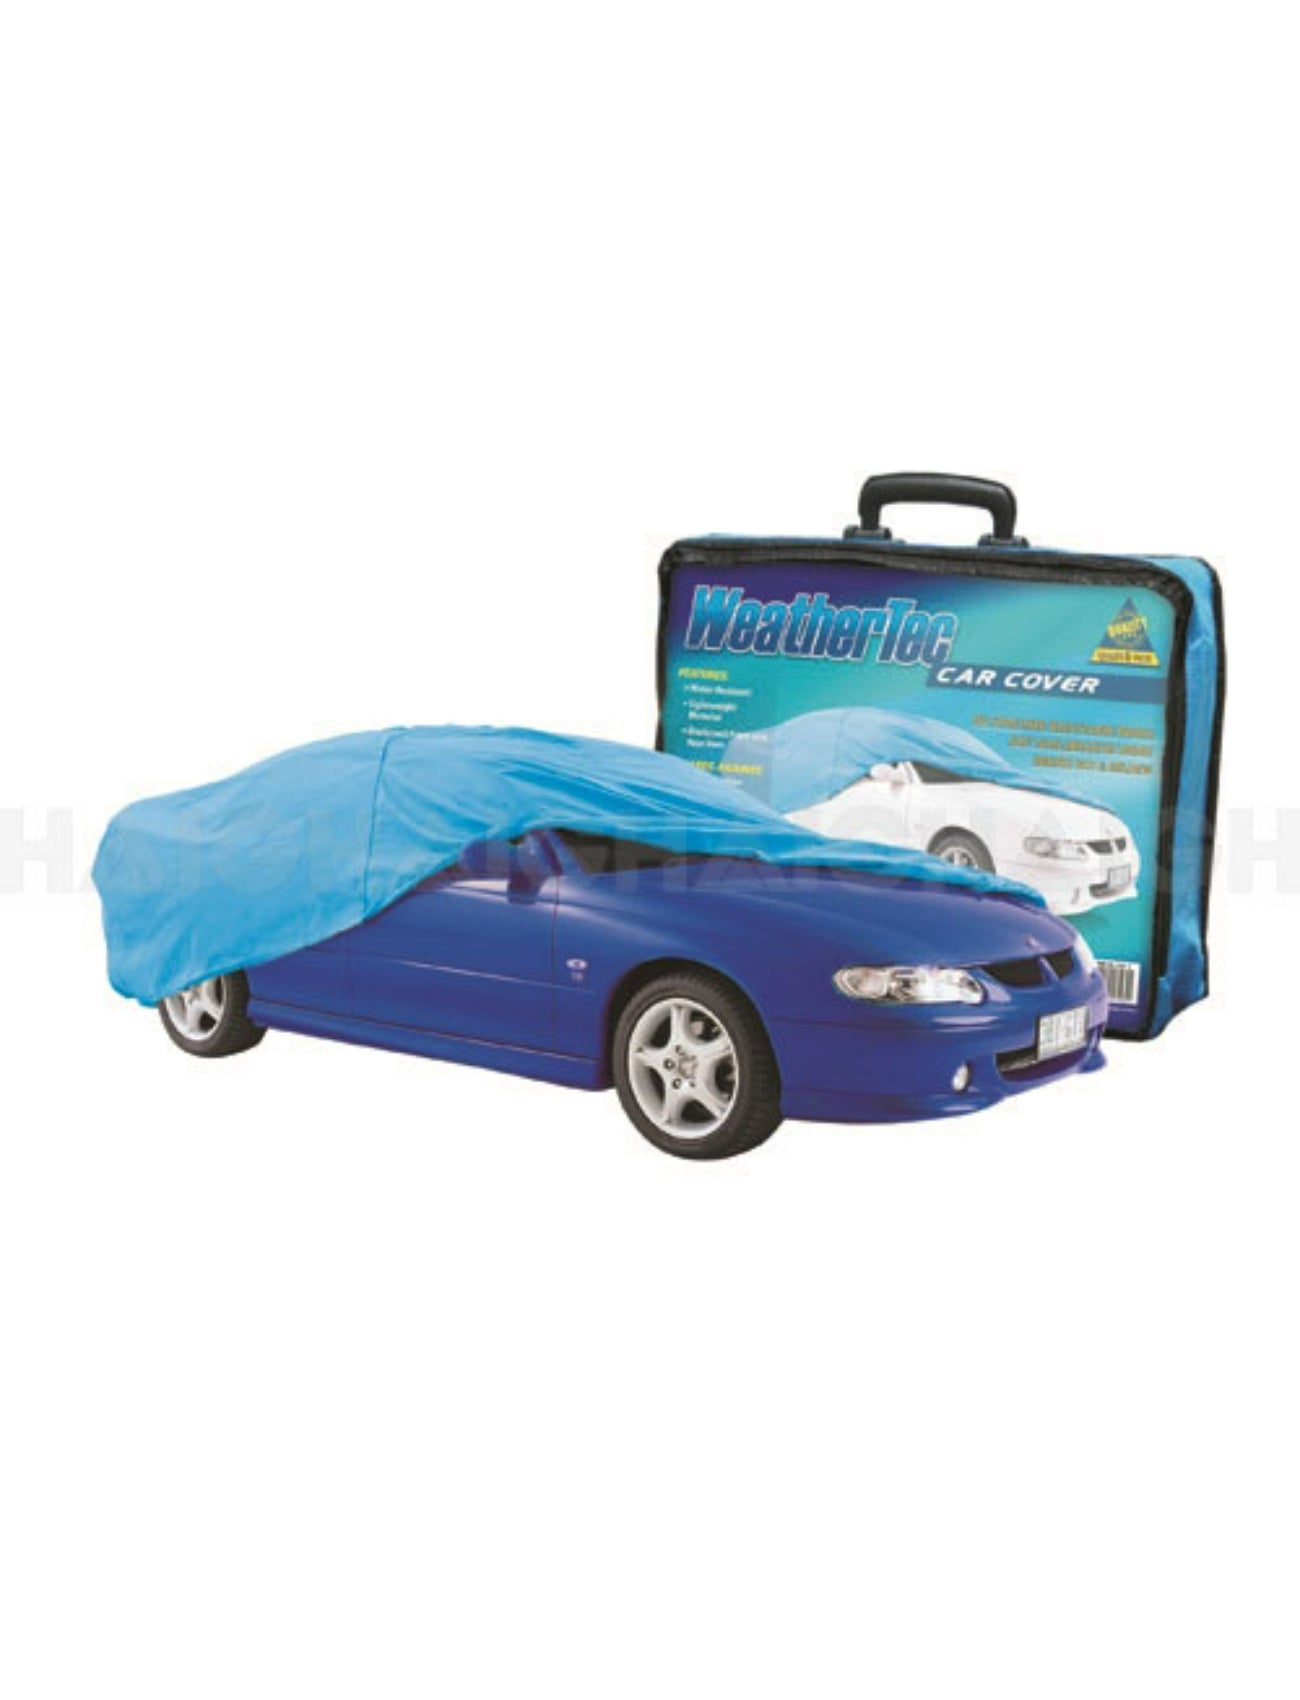 CAR COVER WEATHERTEC SMALL